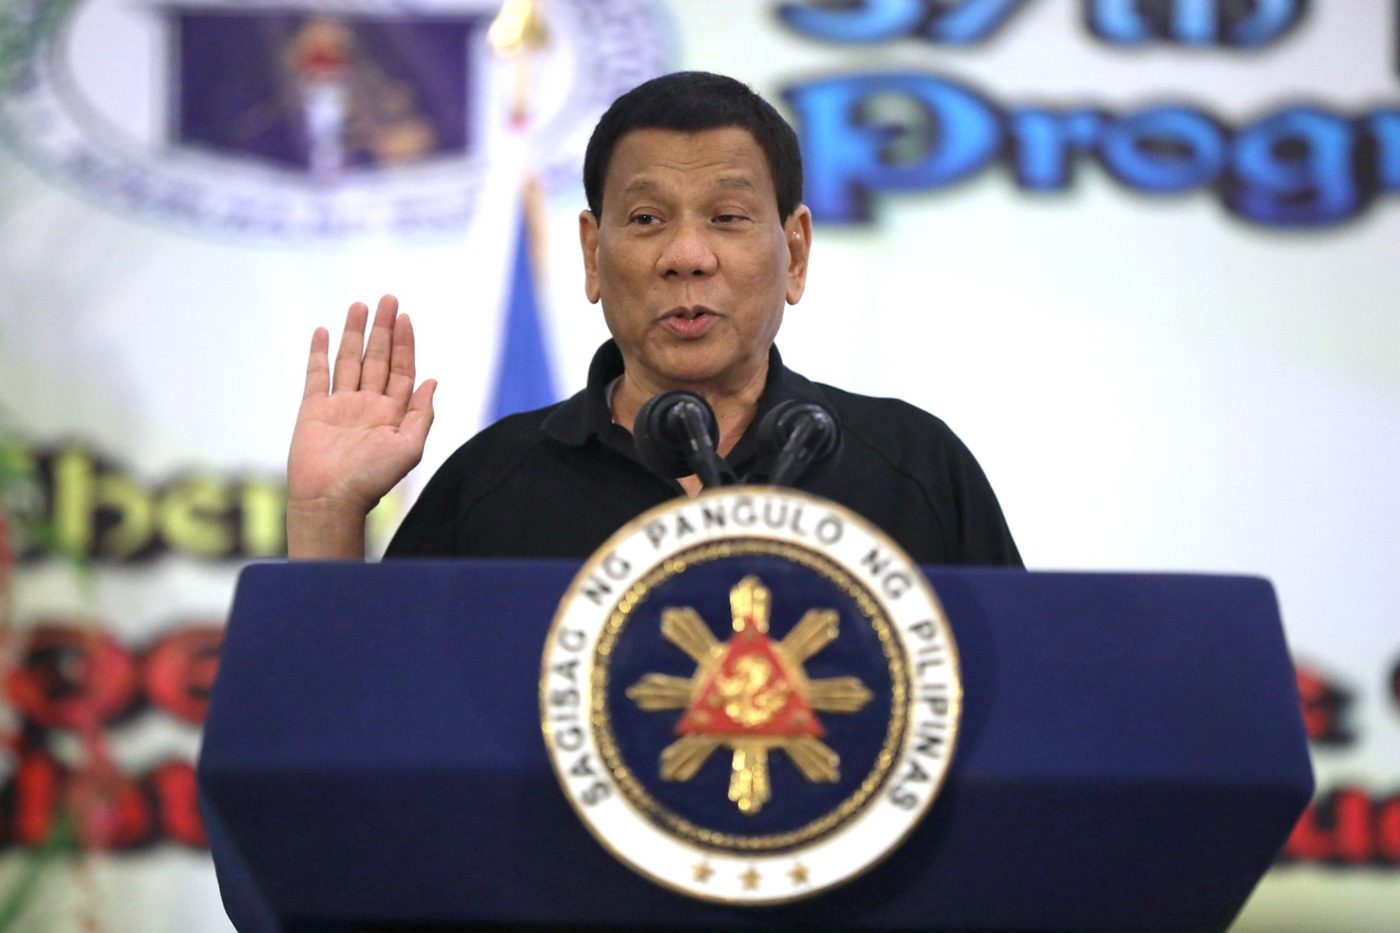 Duterte: I believe in women’s competence, but not in all aspects